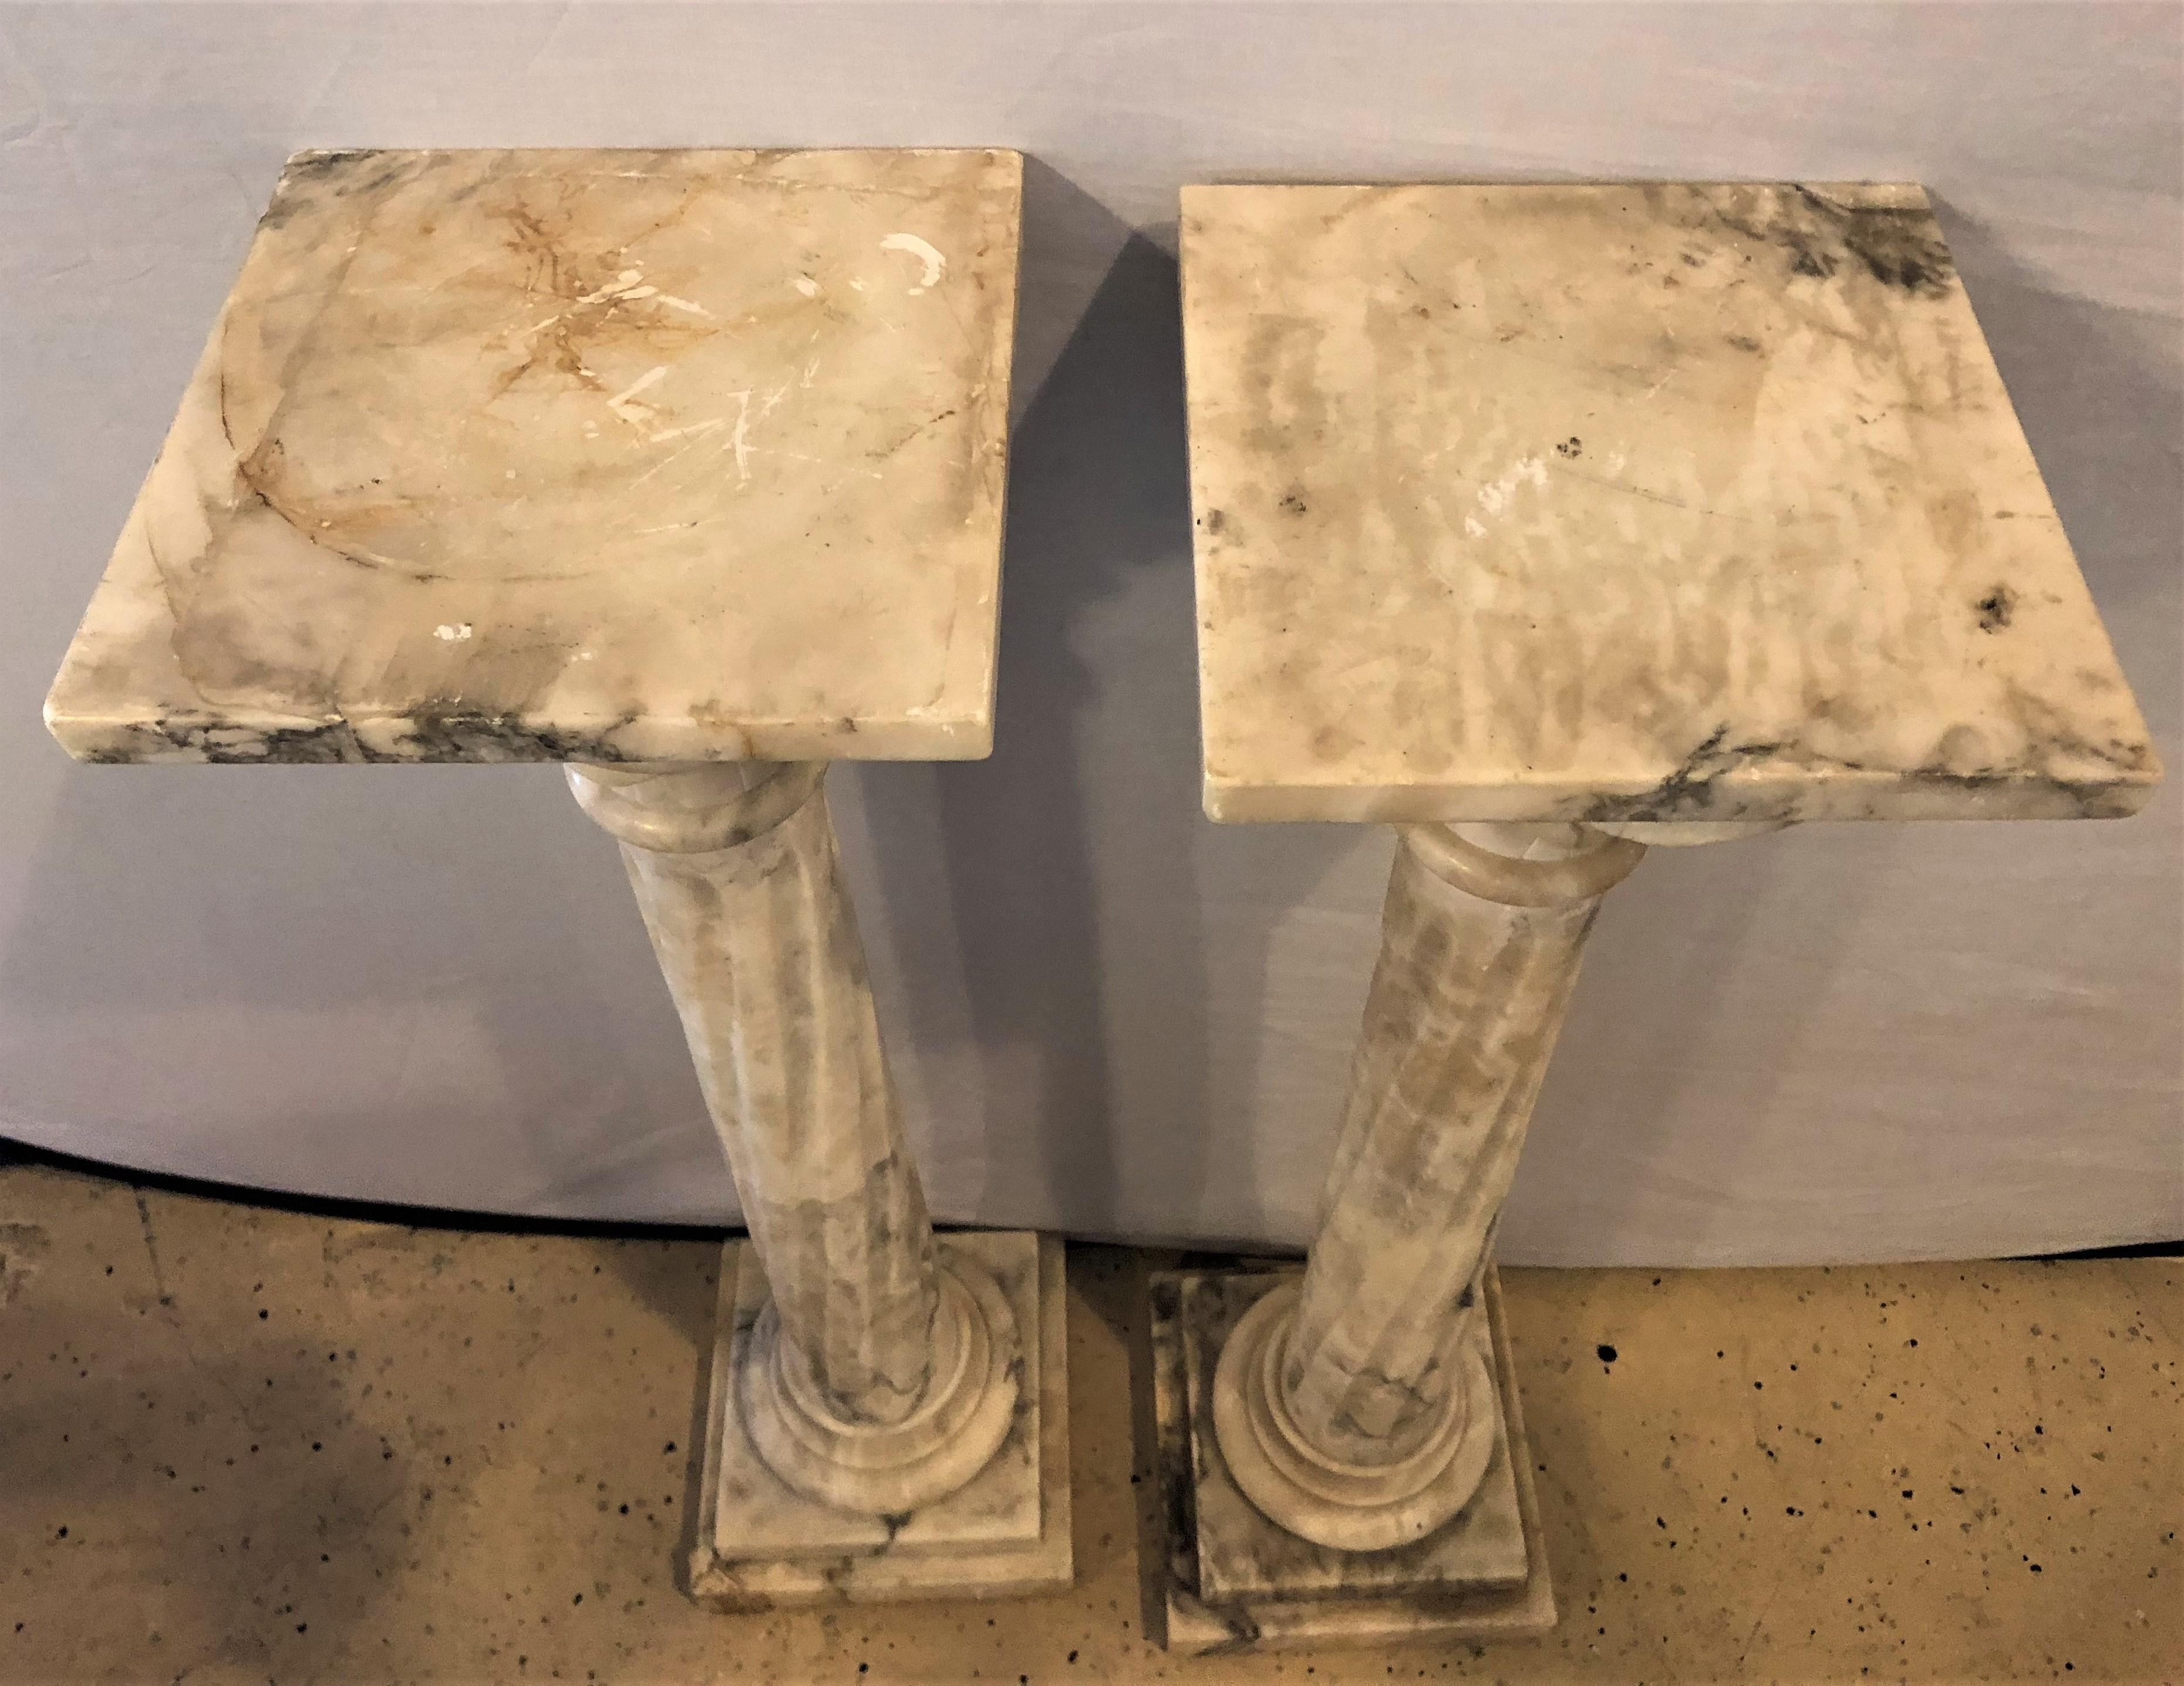 Pair of neoclassical alabaster pedestals grey/white/black Vein Flevr Dis Lis Tops. Each finely decorated and stylish pedestal having a rich gray and black vein on a white background. 

EXX.